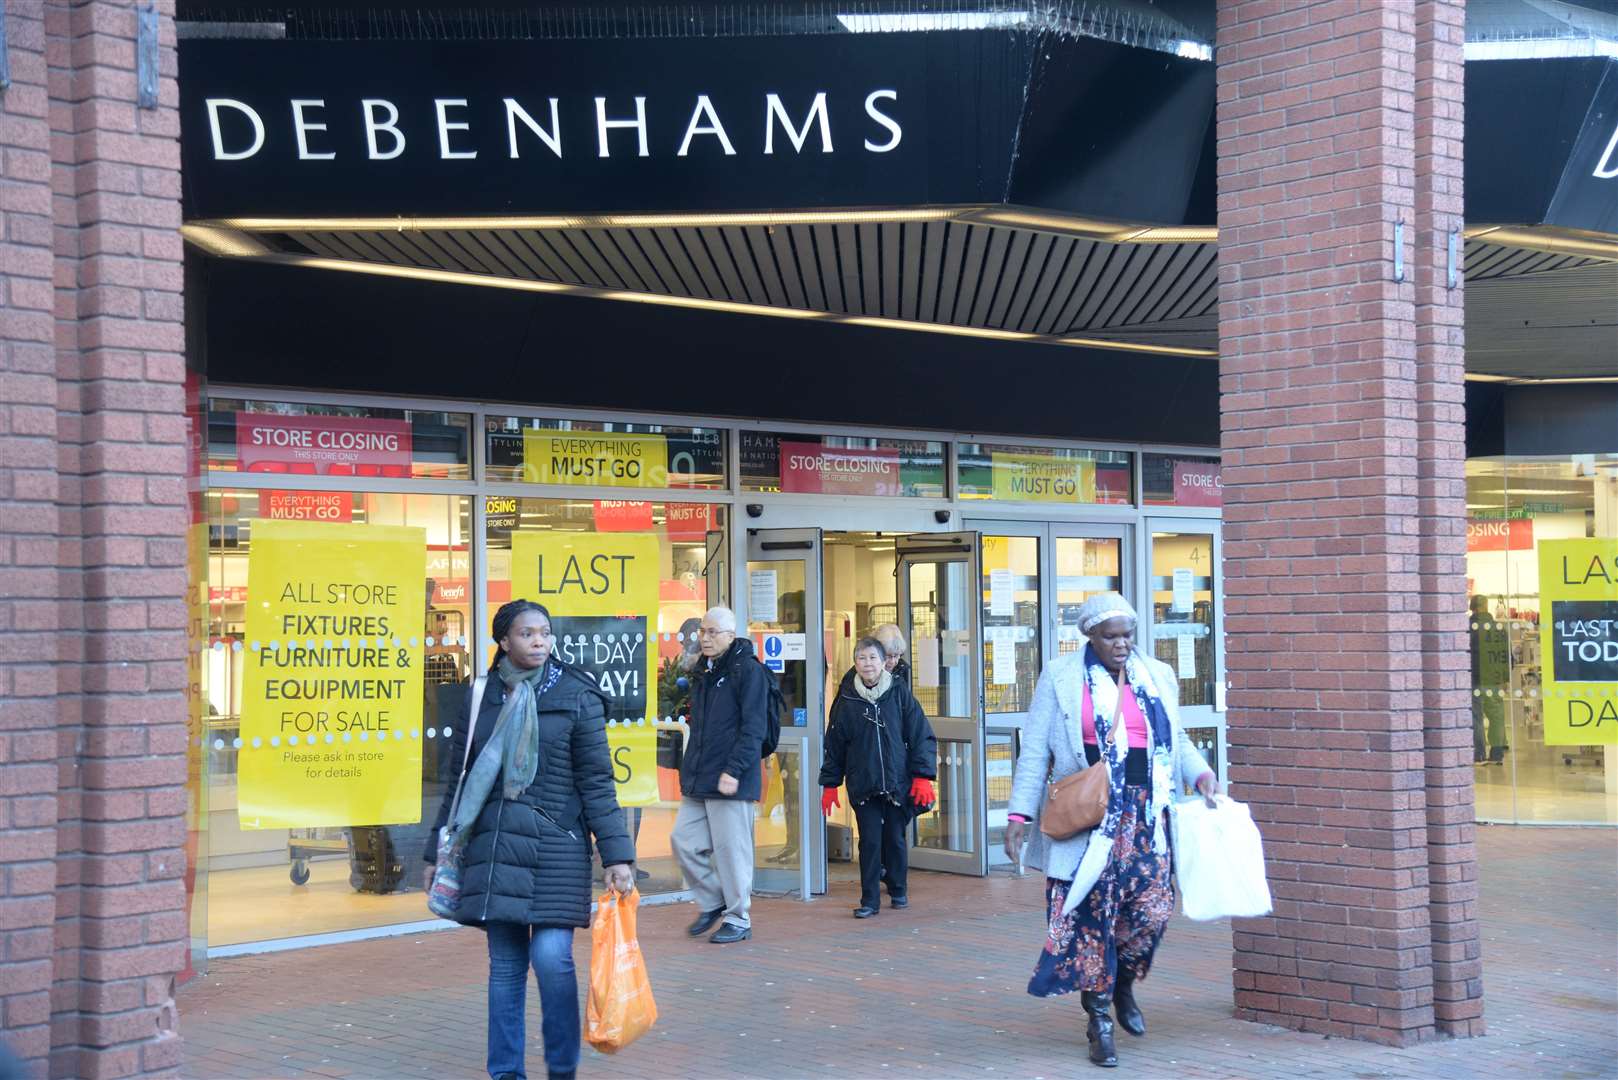 The last shoppers leave the Debenhams store in Chatham which closed in January 2020